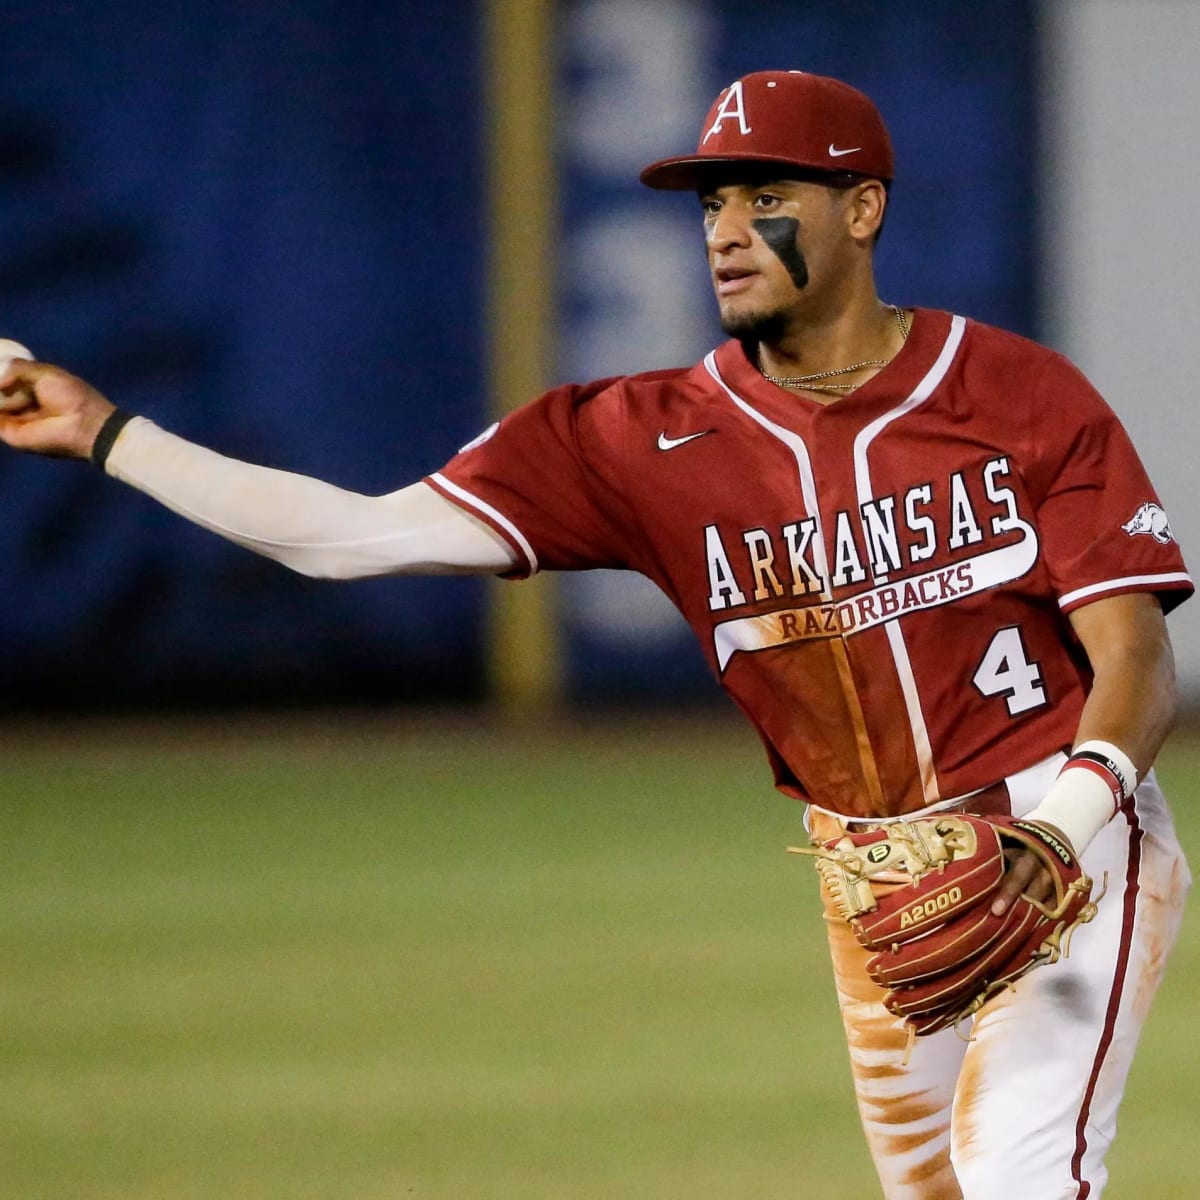 Watch Texas AandM Aggies at Arkansas Razorbacks in College Baseball - How to Watch and Stream Major League and College Sports